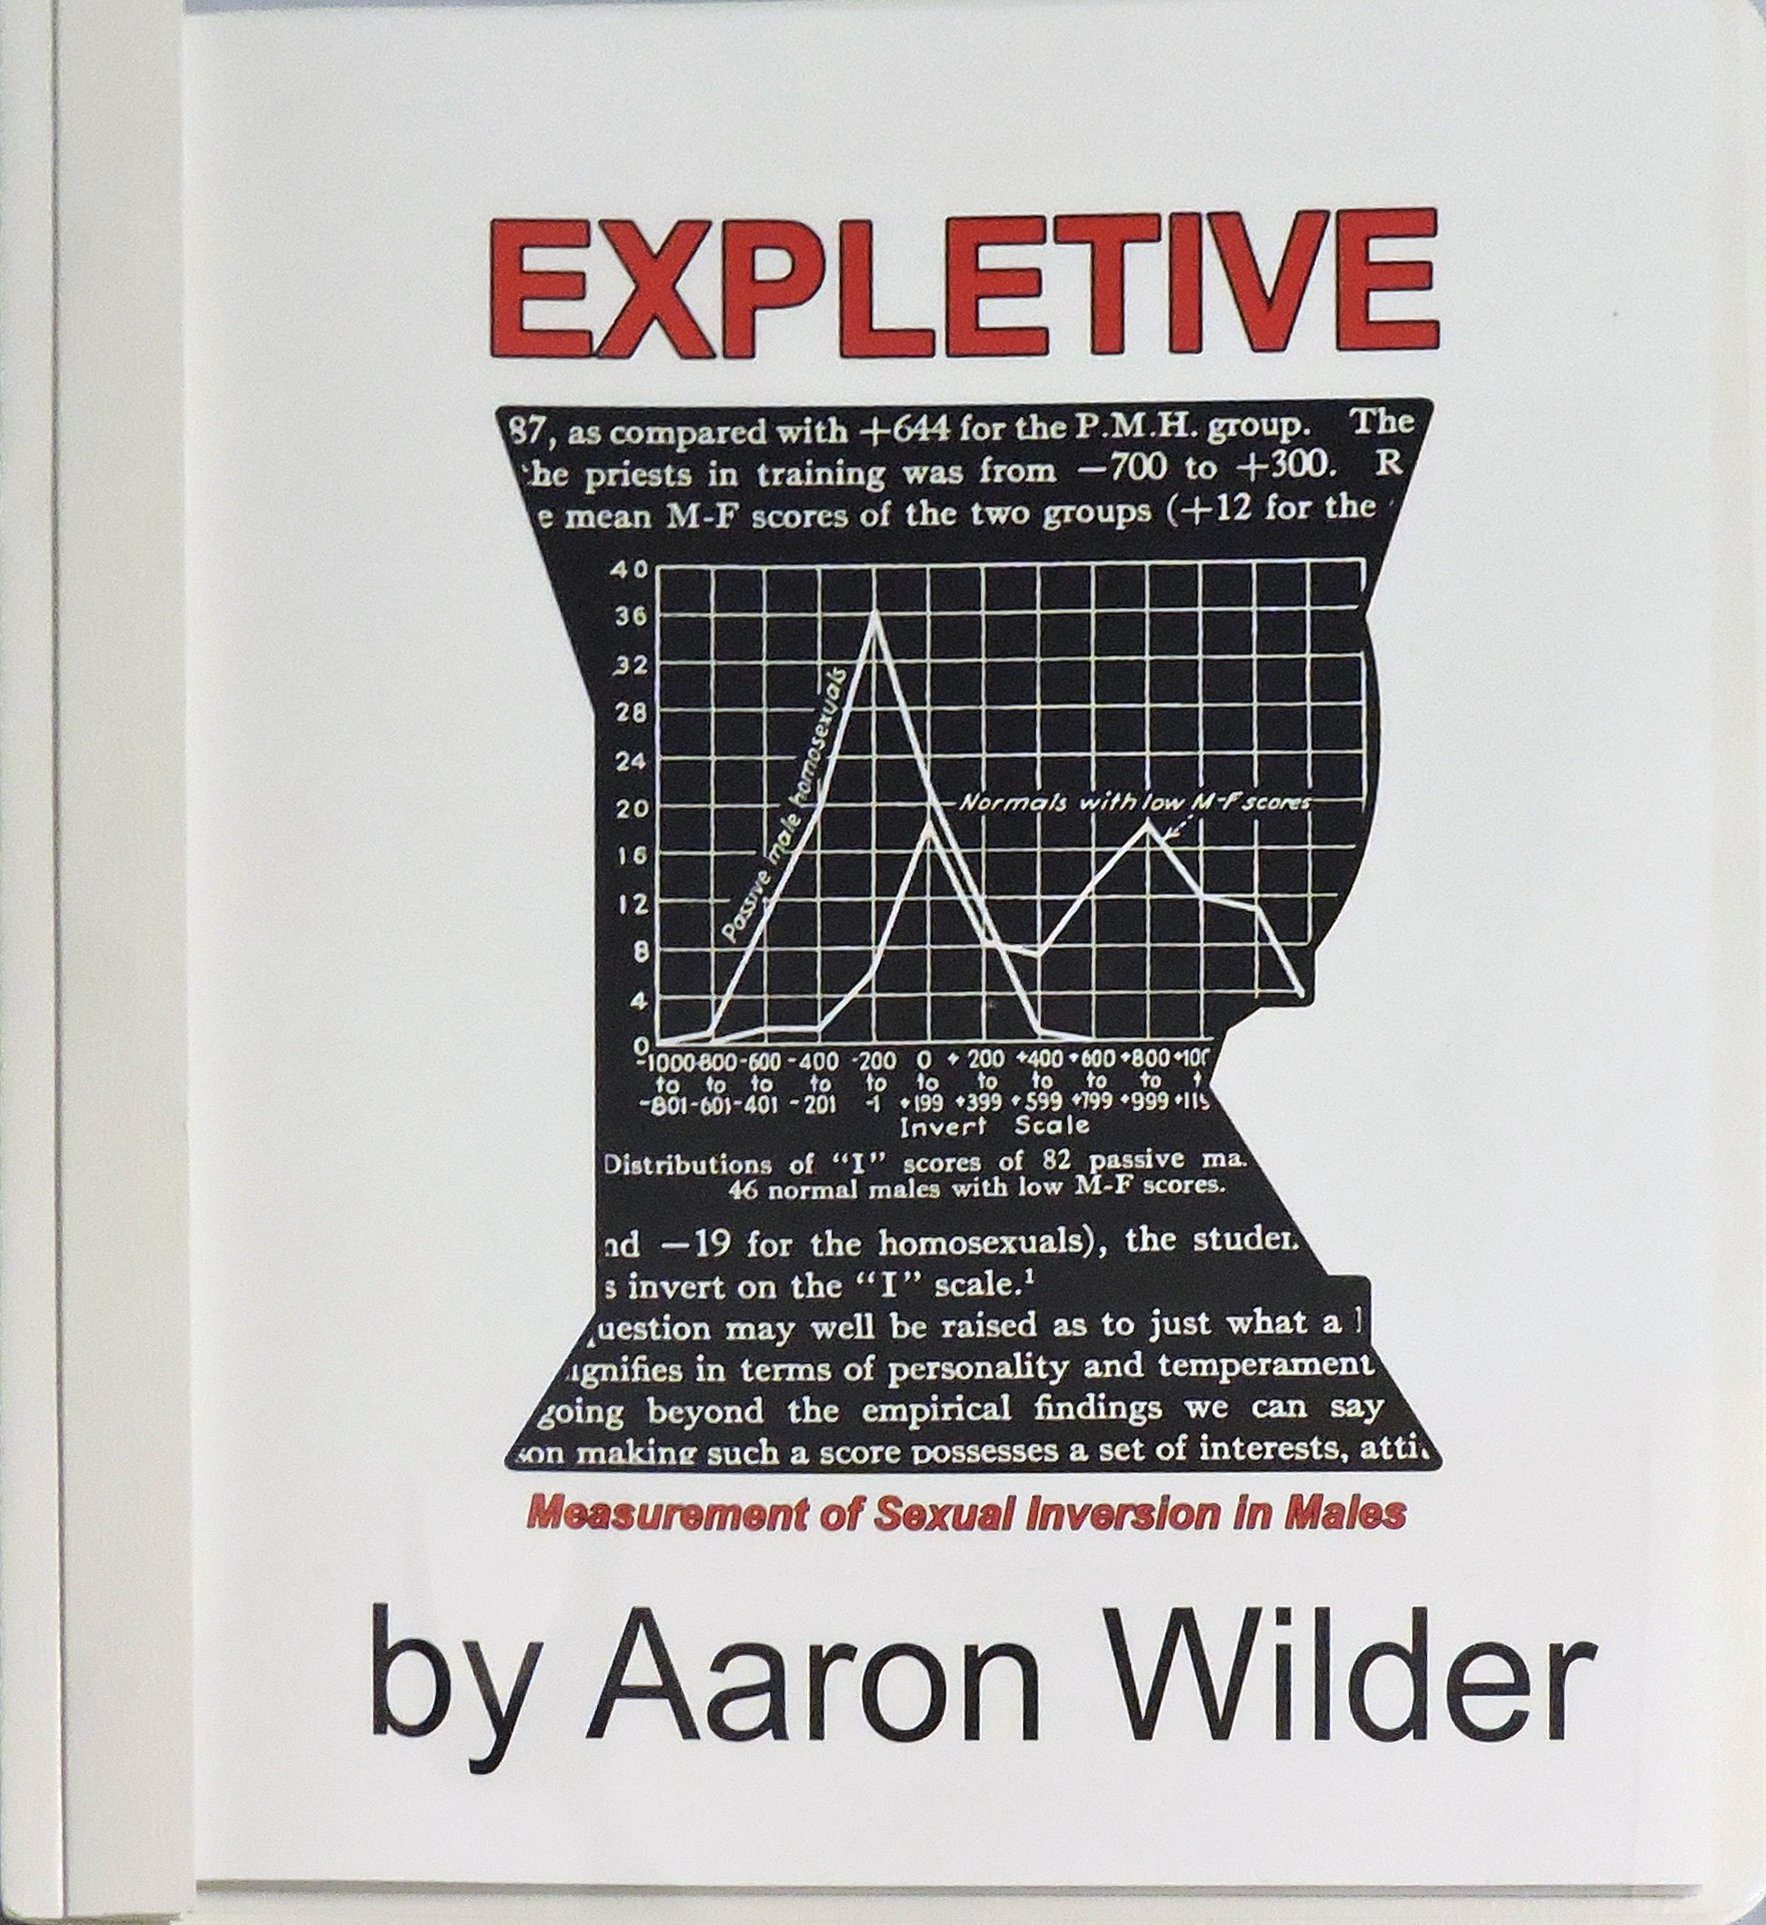 Expletive: Measurement of Sexual Inversion in Males by Aaron Wilder